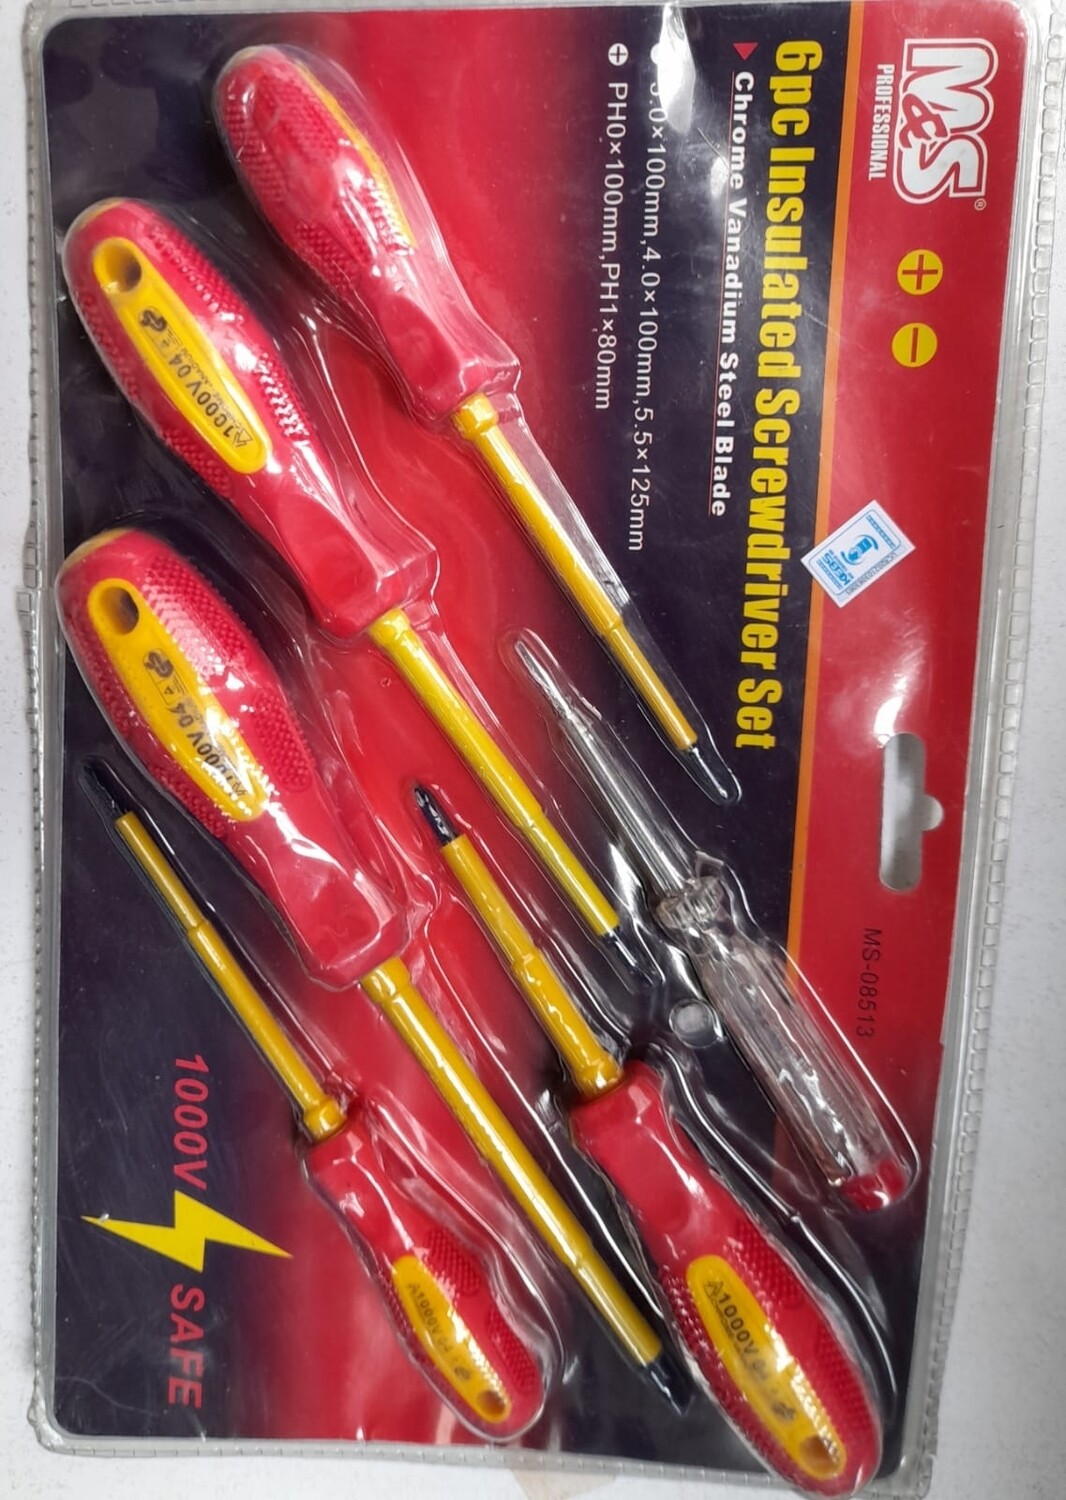 M&S Professional Insulated Screwdriver Set - 6-Piece Blister Pack #MS-08513